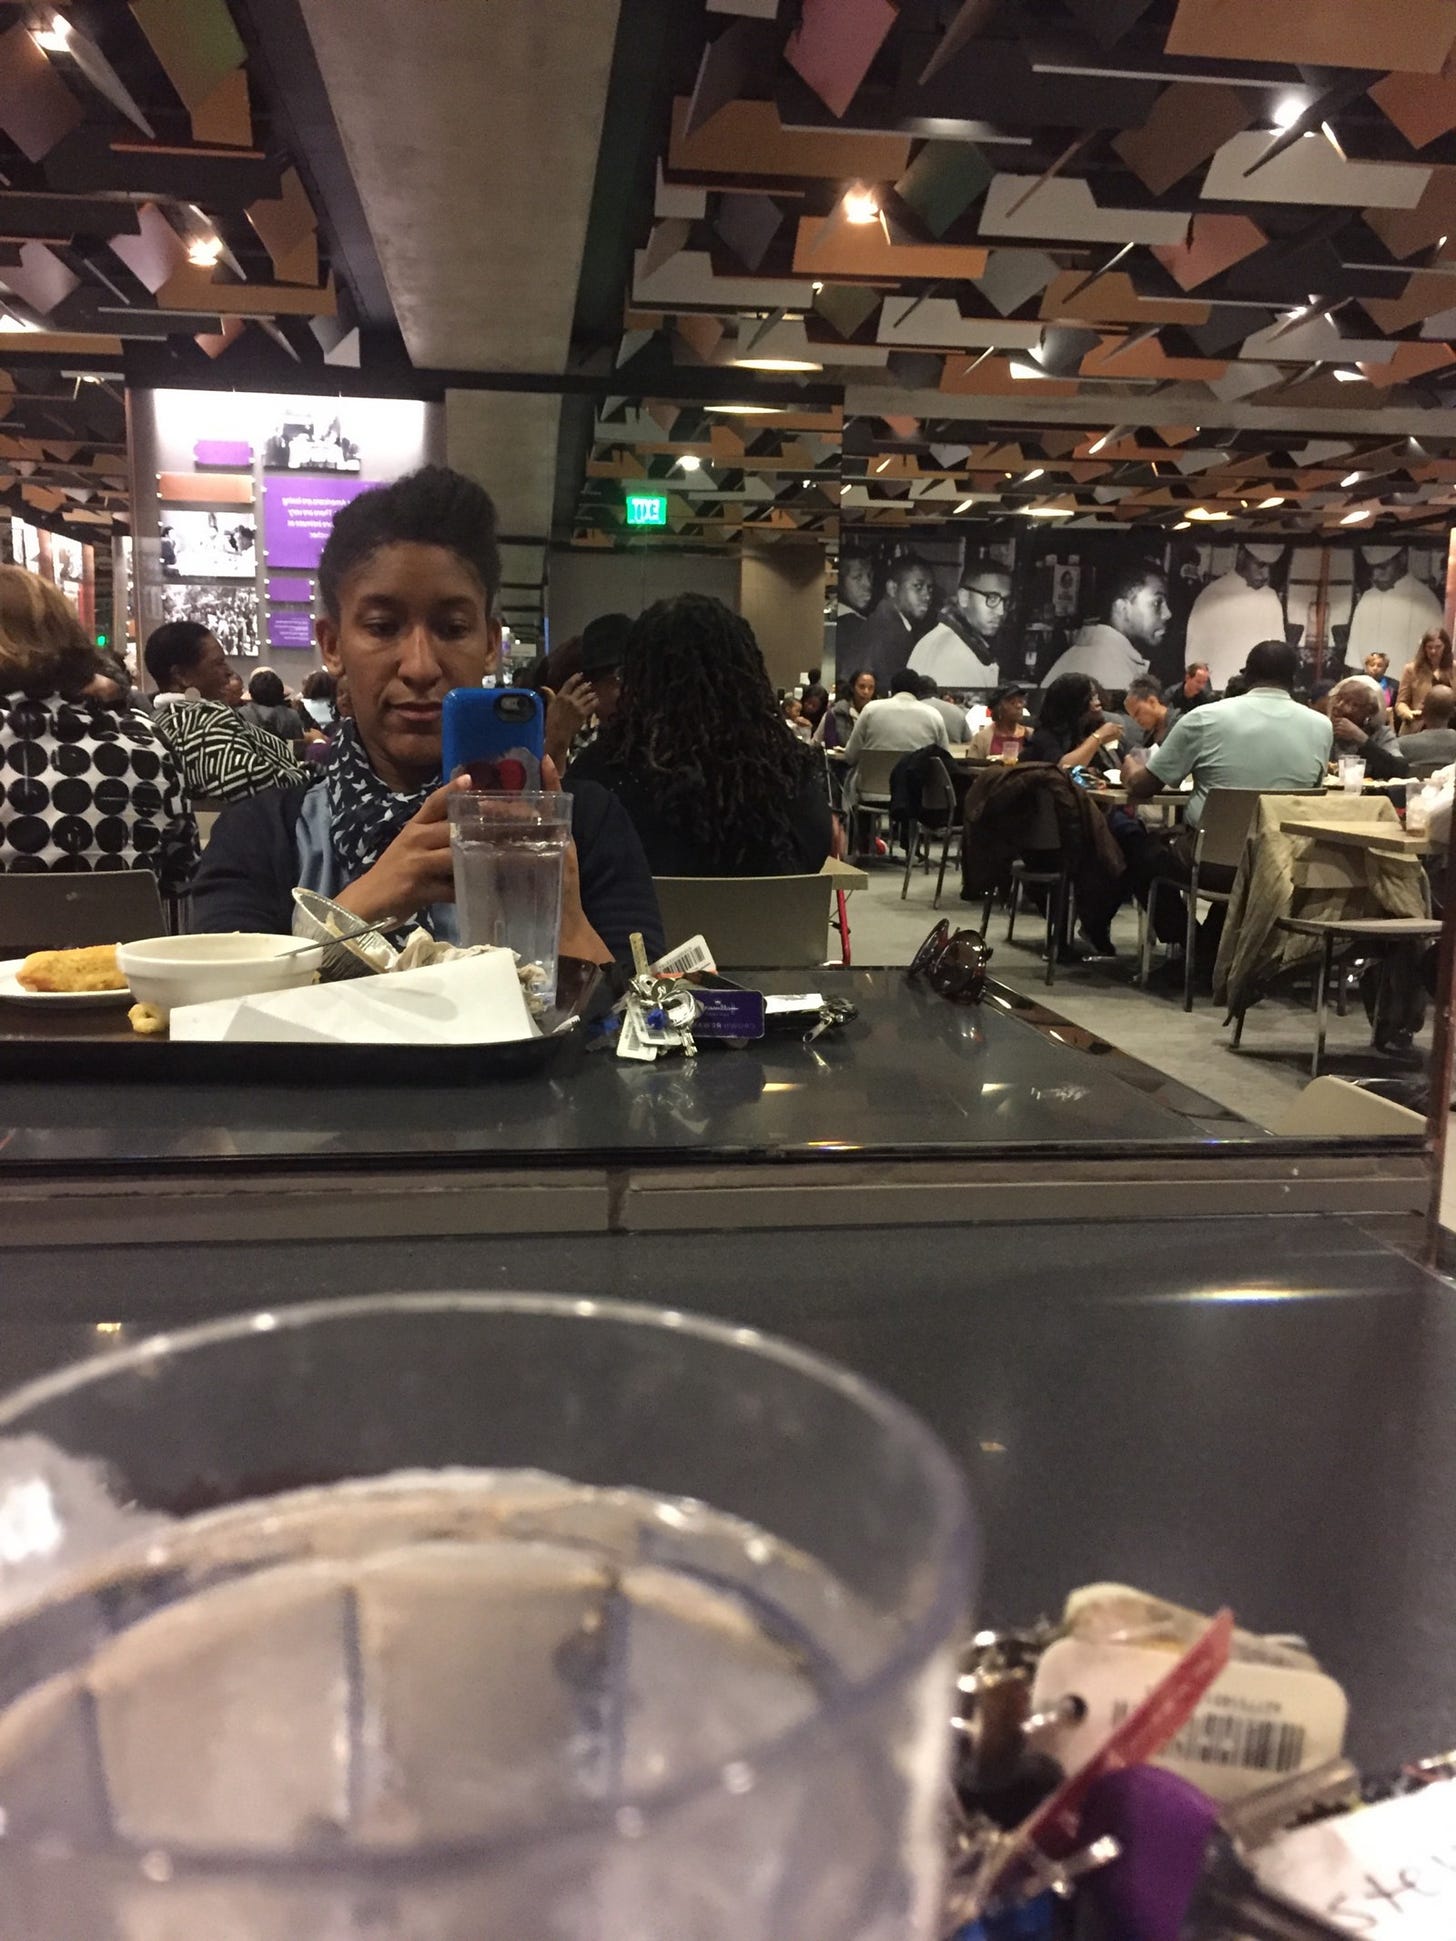 Inside the cafeteria of the National Museum of African-American Culture and History. Kristen is taking a mirror selfie of the other wall of the room, featuring a print of the Greensboro 4 engaged in the sit-in process